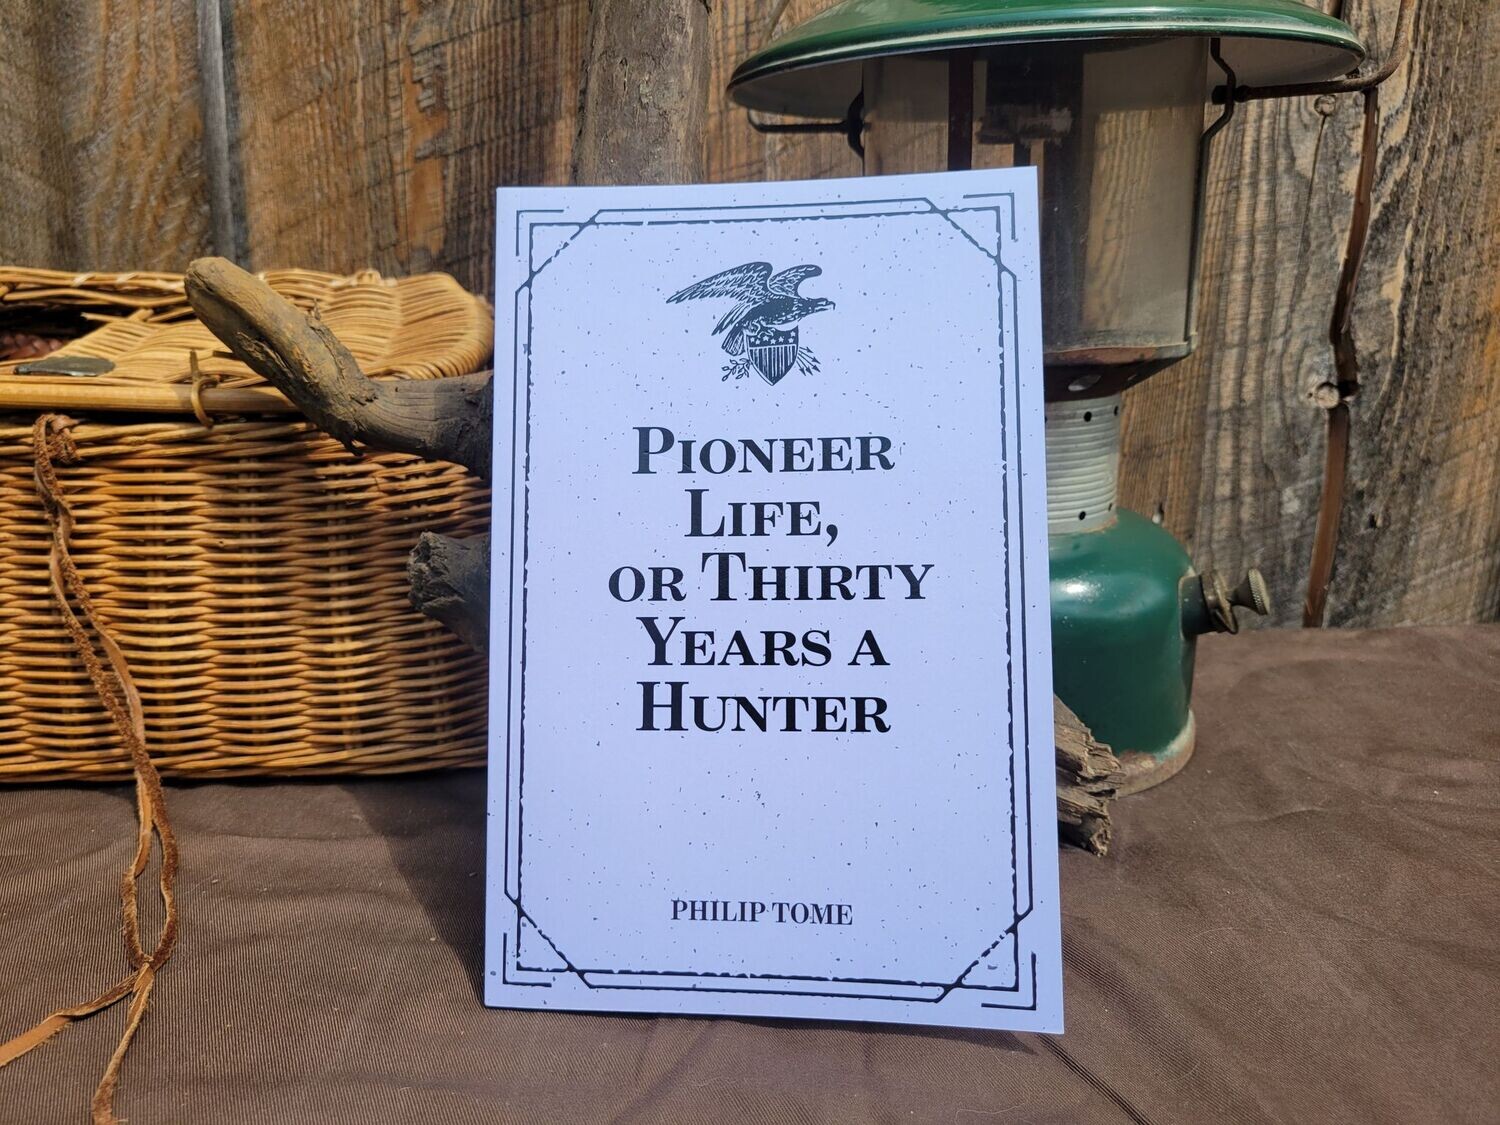 Pioneer Life, Thirty Years a Hunter by Philip Tome